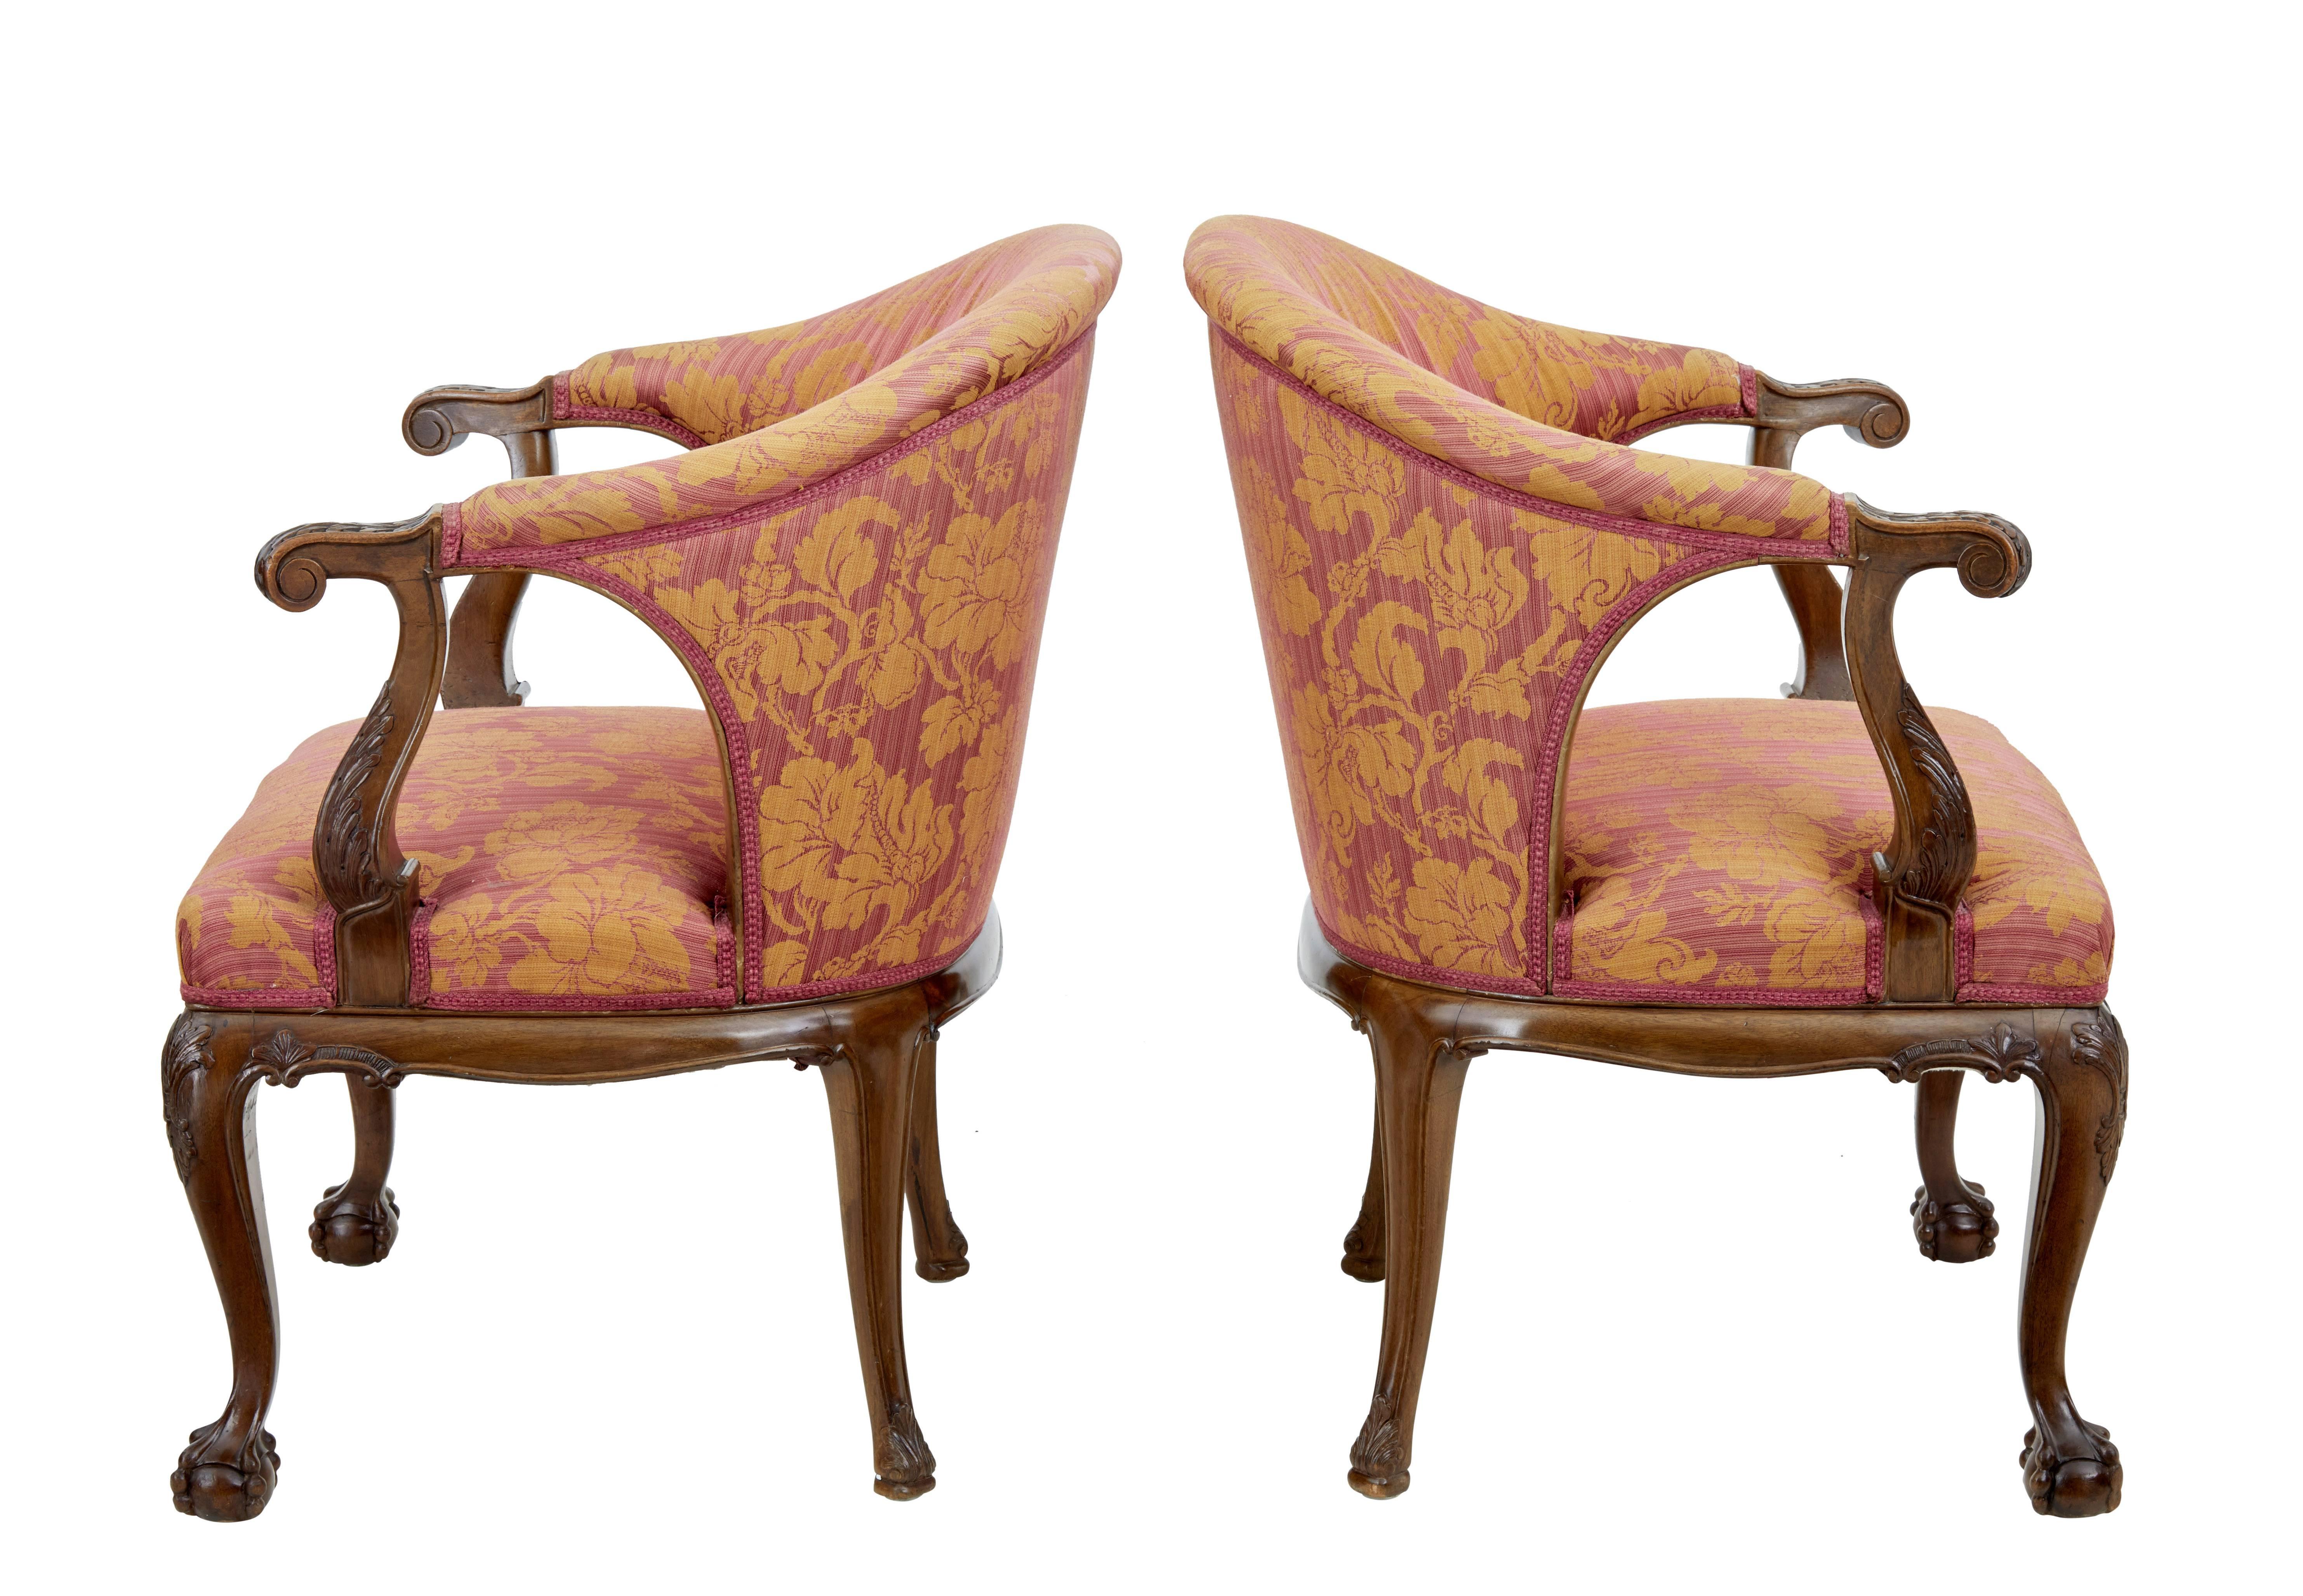 Fine pair of Georgian inspired club armchairs, circa 1900.

Shaped back rest with carved open arms showing acanthus leaves.

Carved underneath the seat with a shell and swags. Cabriole legs and standing on front ball and claw feet.

Fabric is